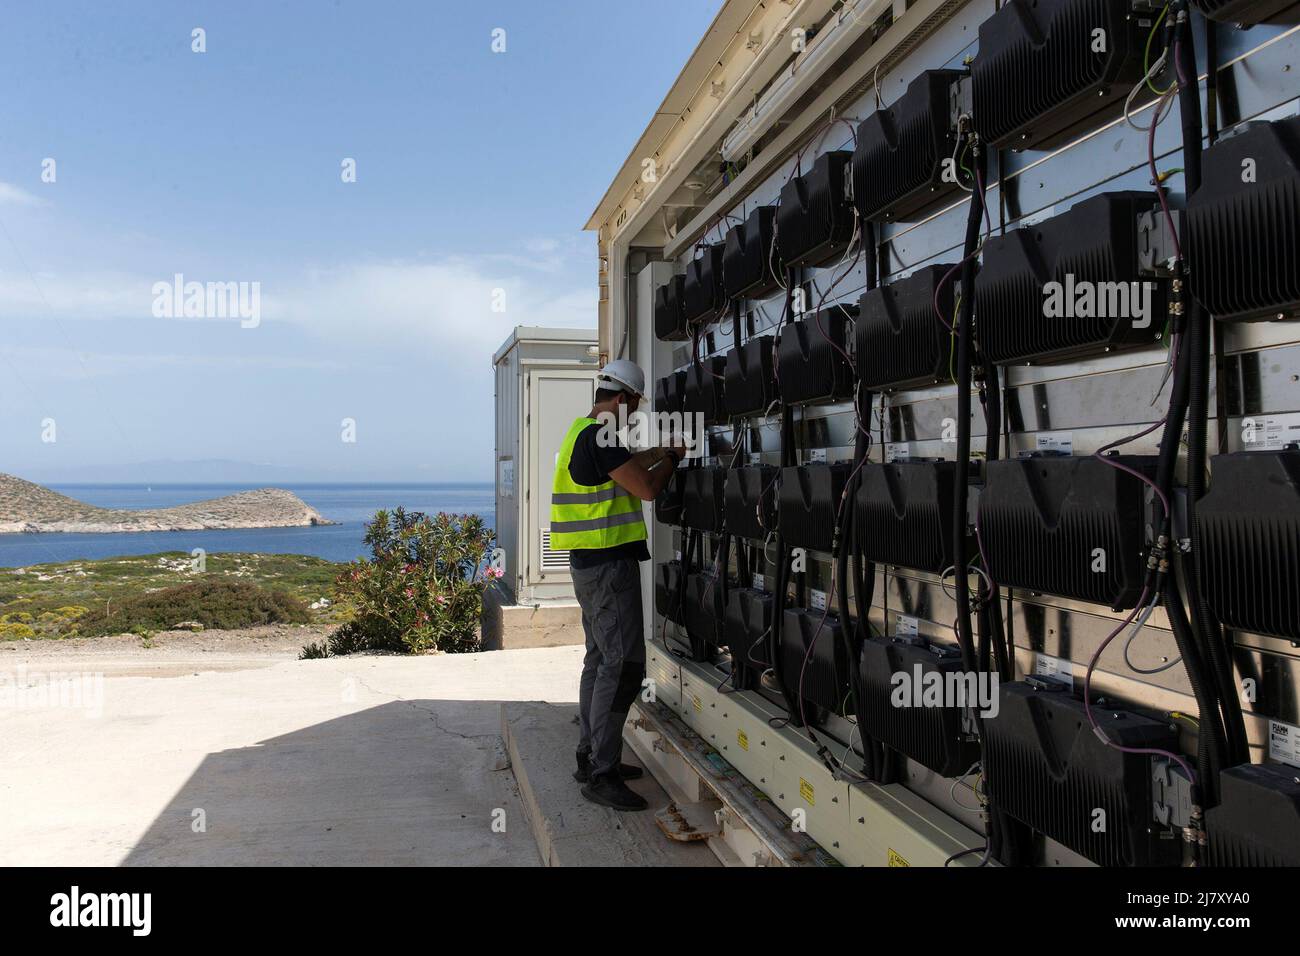 Athens, Greece. 9th May, 2022. An employee works by the batteries of the  energy storage system on the island of Tilos, Greece, May 9, 2022. Tilos, a  small island at the southeastern